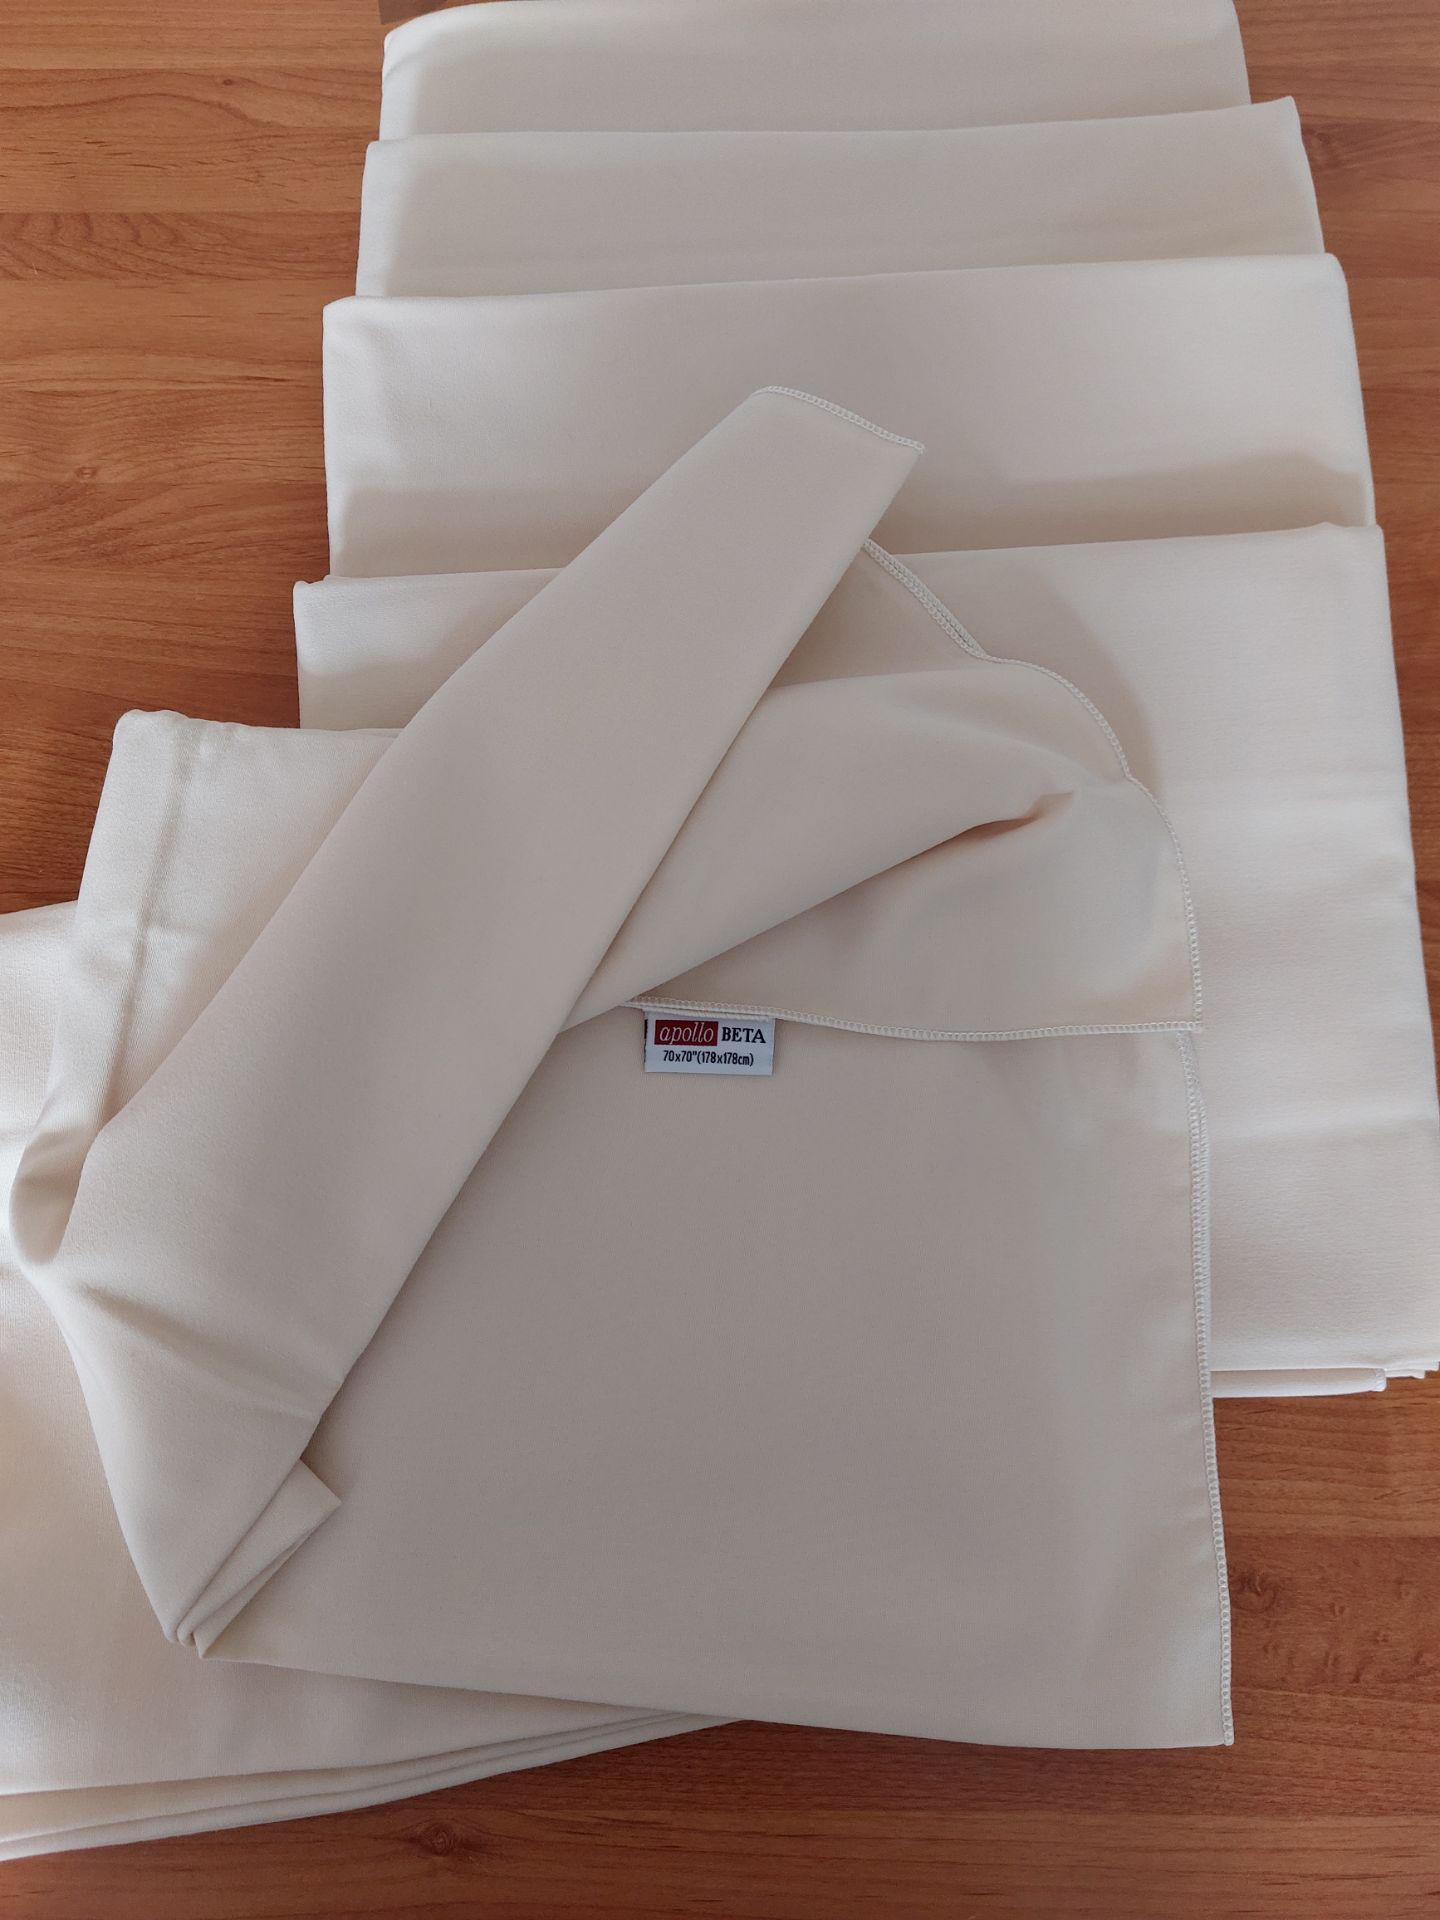 Pack of 5 Brand New Tablecloths - Image 2 of 6